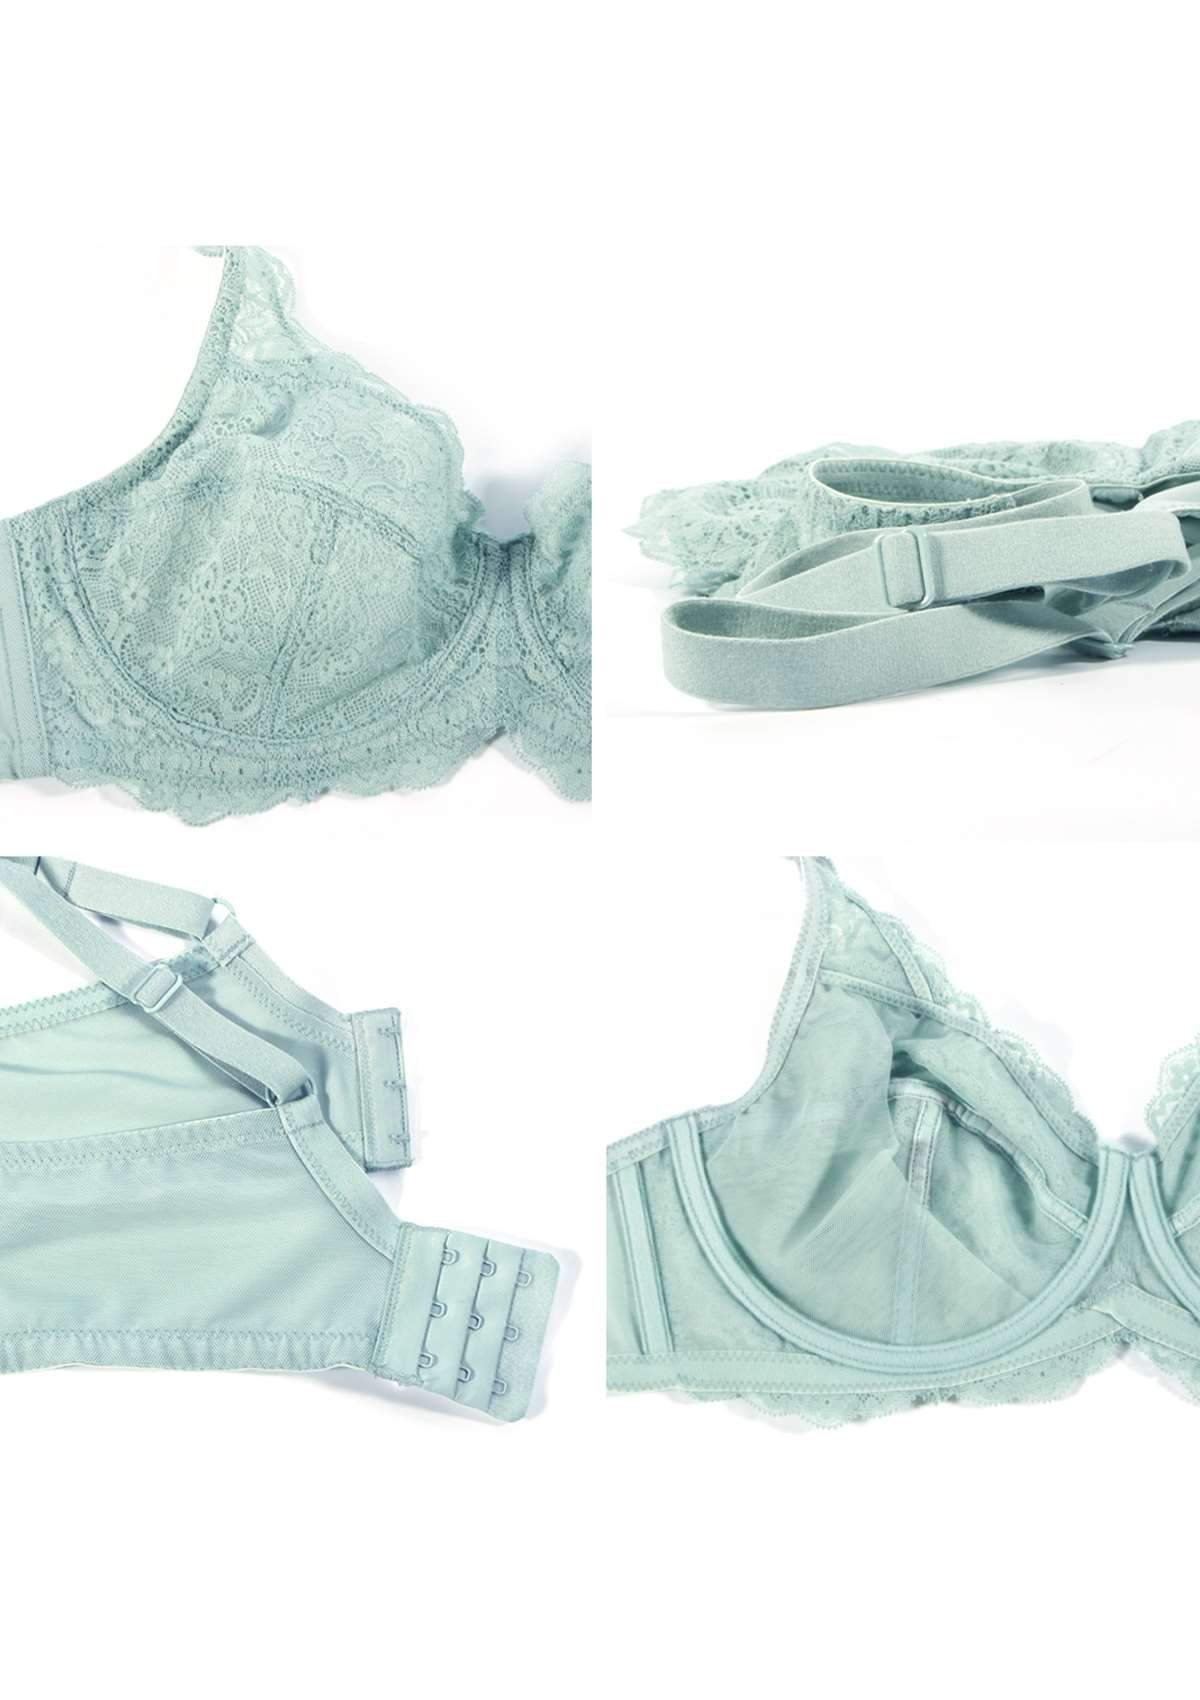 HSIA All-Over Floral Lace: Best Bra For Elderly With Sagging Breasts - Pewter Blue / 44 / DDD/F